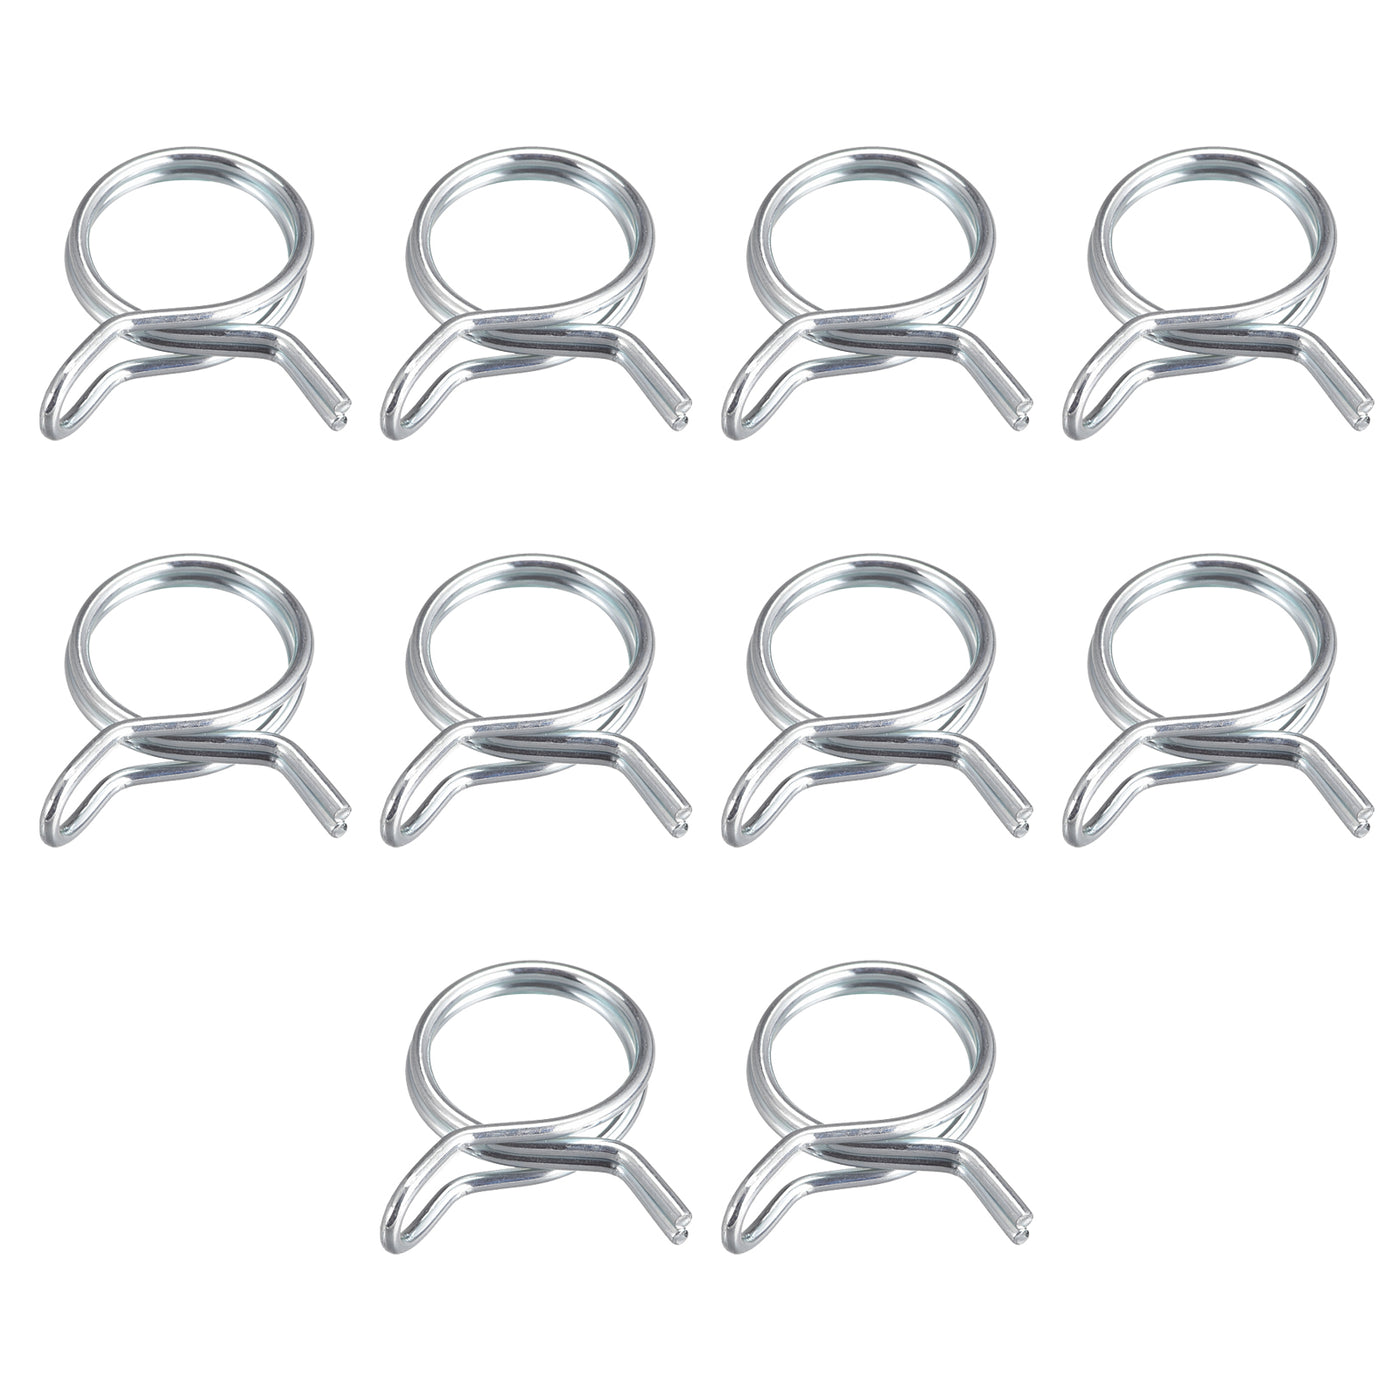 Uxcell Uxcell Double Wire Spring Hose Clamp, 10pcs 65Mn Steel 25mm Spring Clips, Silver Tone